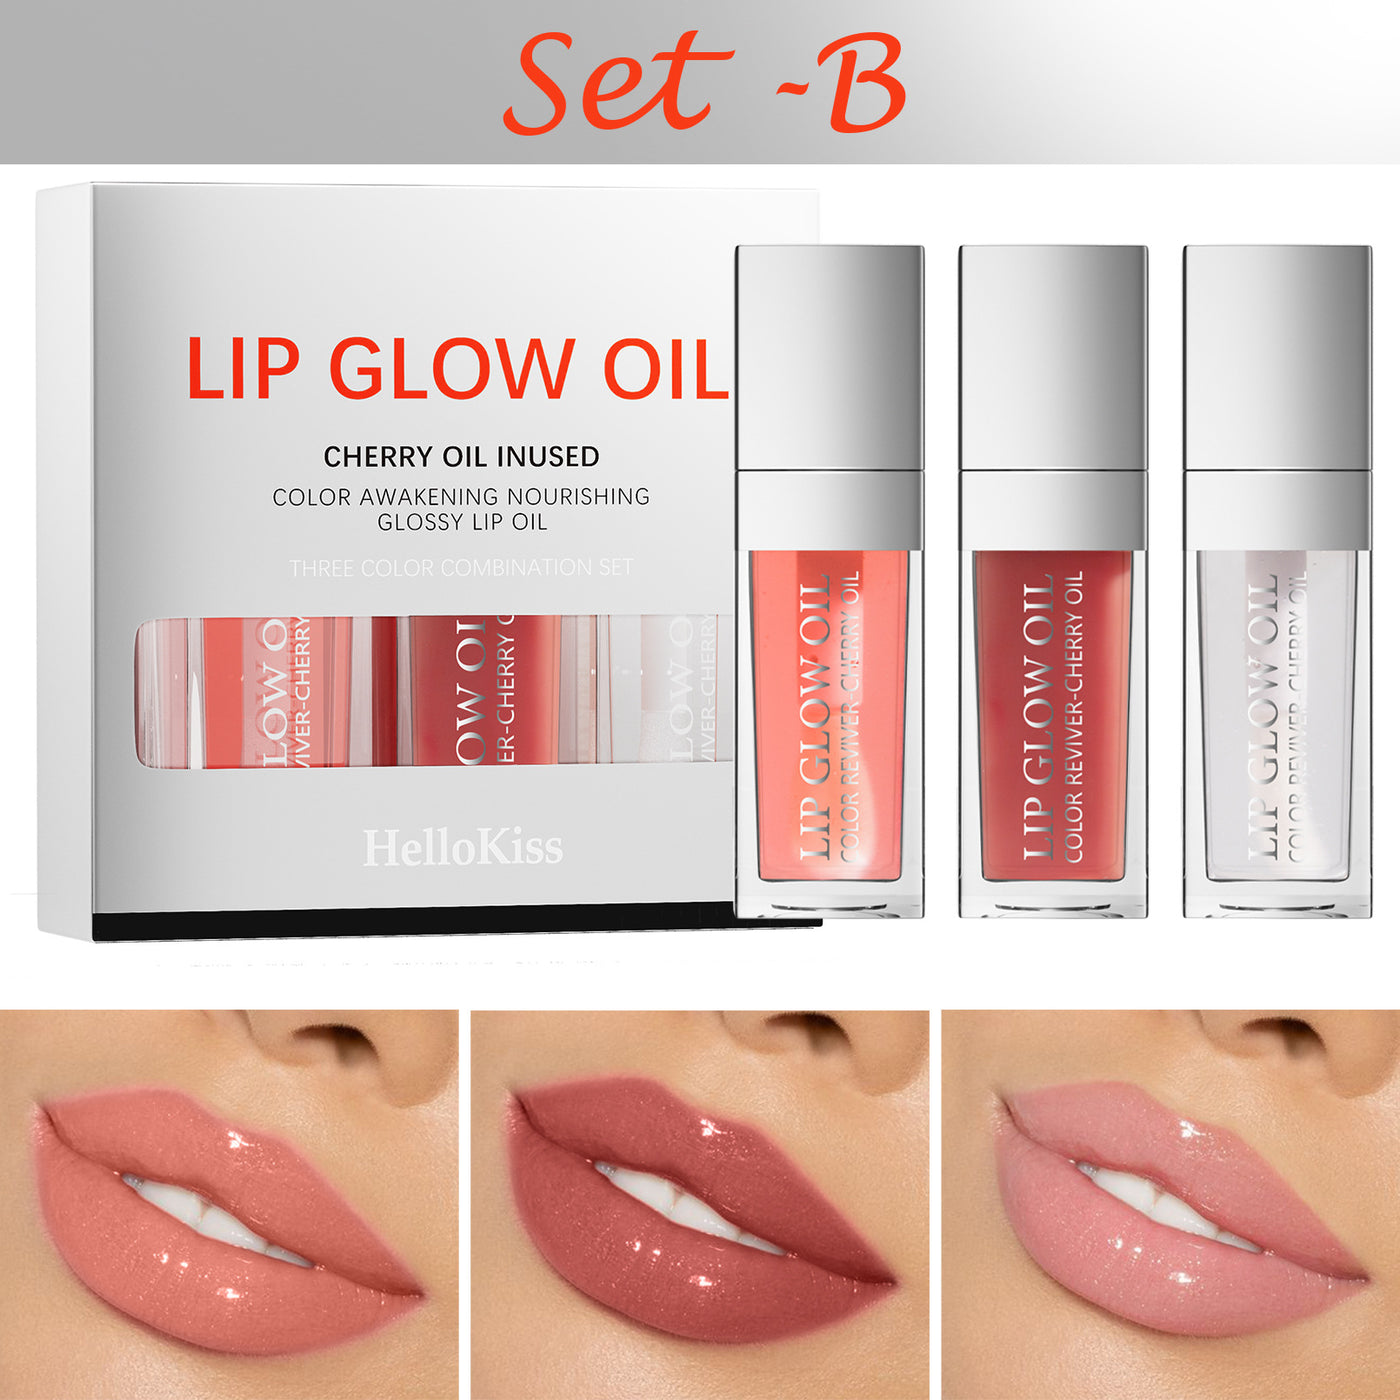 No Stain On Cup Moisturizing And Nourishing Lip Lip Gloss 3 Pack Suit